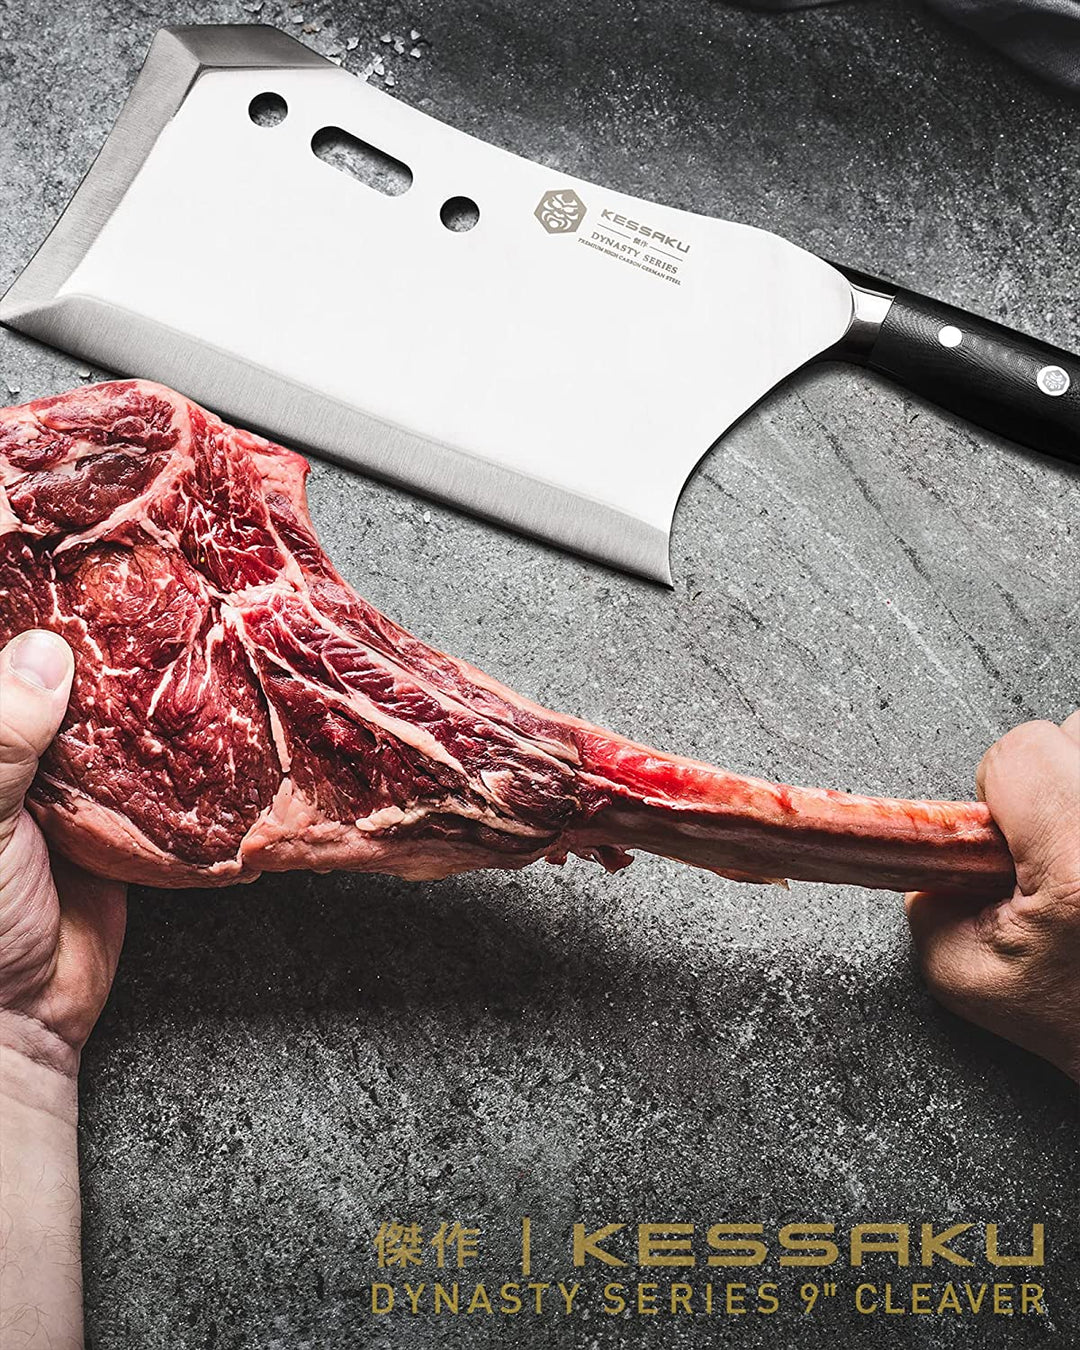 A butcher holds a large tomahawk steak separated with the Dynasty Annihilator Butcher Knife